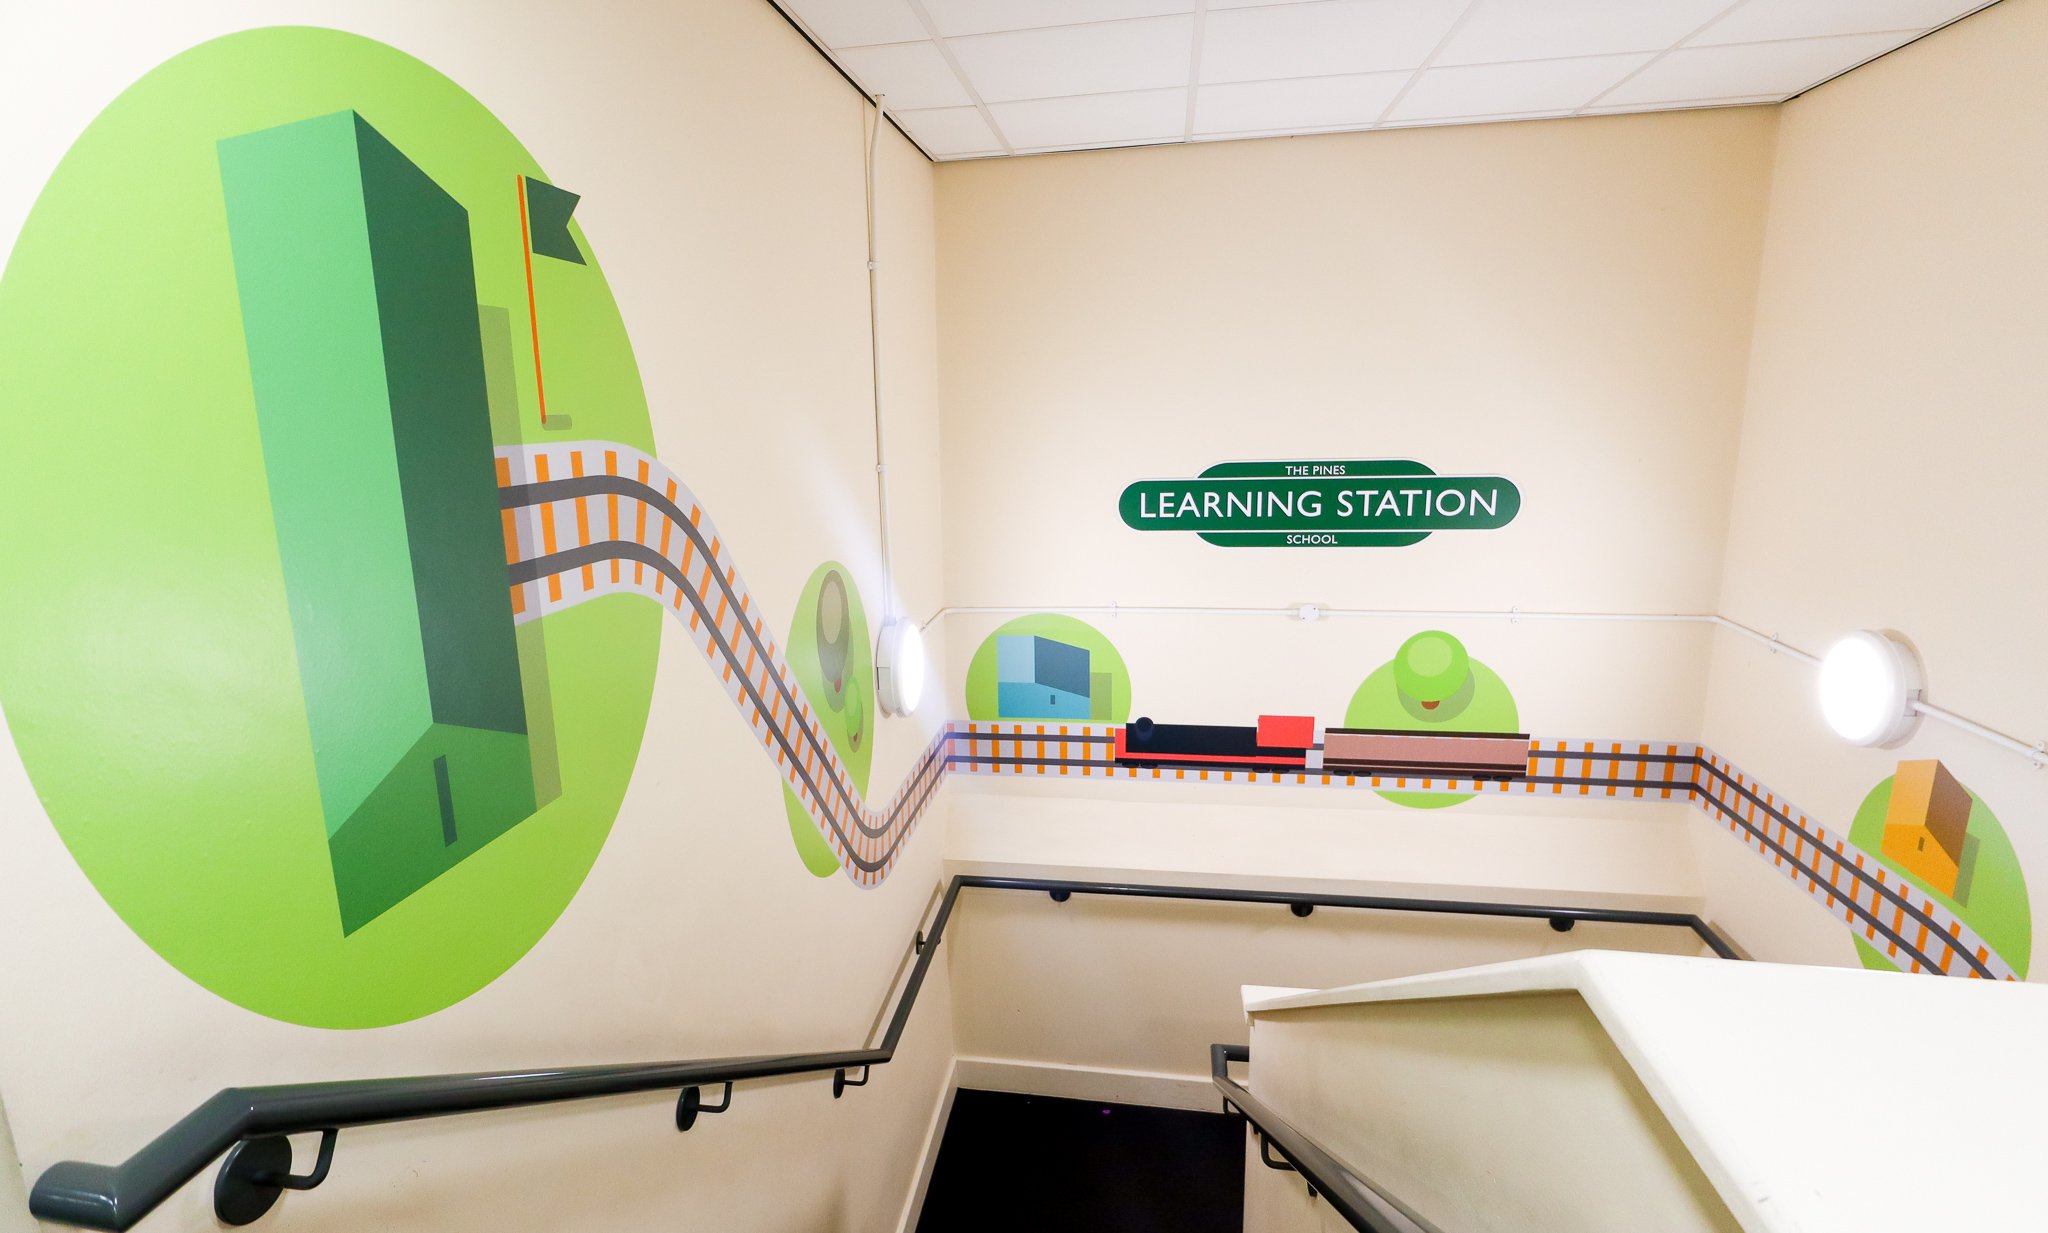 The-Pines-Learning-Station-Wayfinding-Wall-Graphics-02.jpg